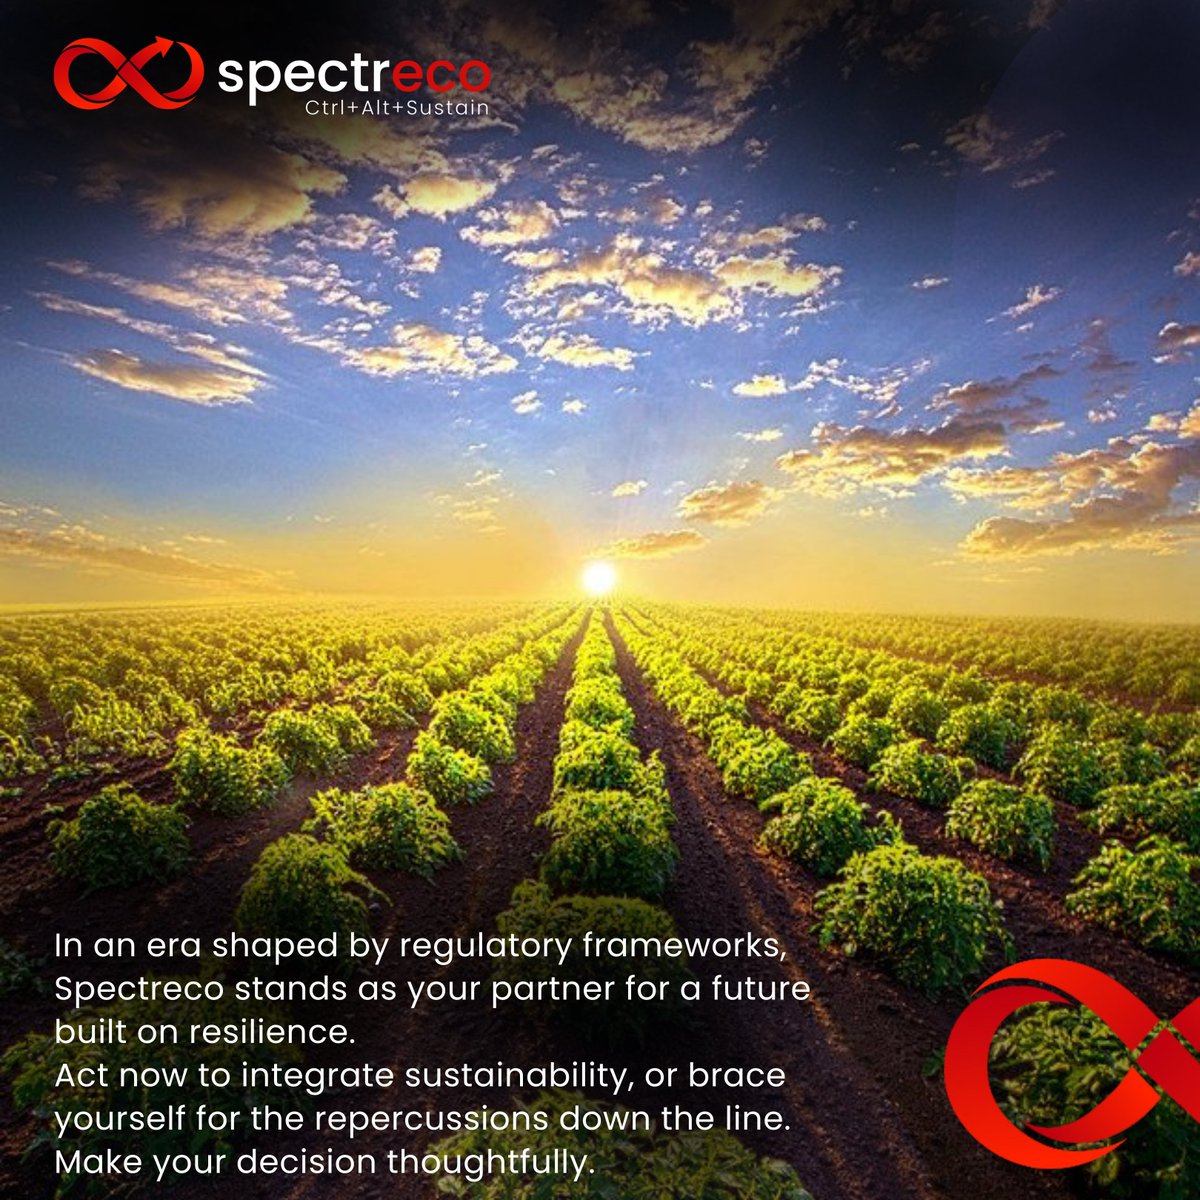 Navigate the regulatory landscape with confidence alongside Spectreco. Embrace sustainability today for a future of resilience, or risk the consequences tomorrow. The choice is yours.

#RegulatoryCompliance #SustainabilityNow #ResilientFuture #EnvironmentalResponsibility